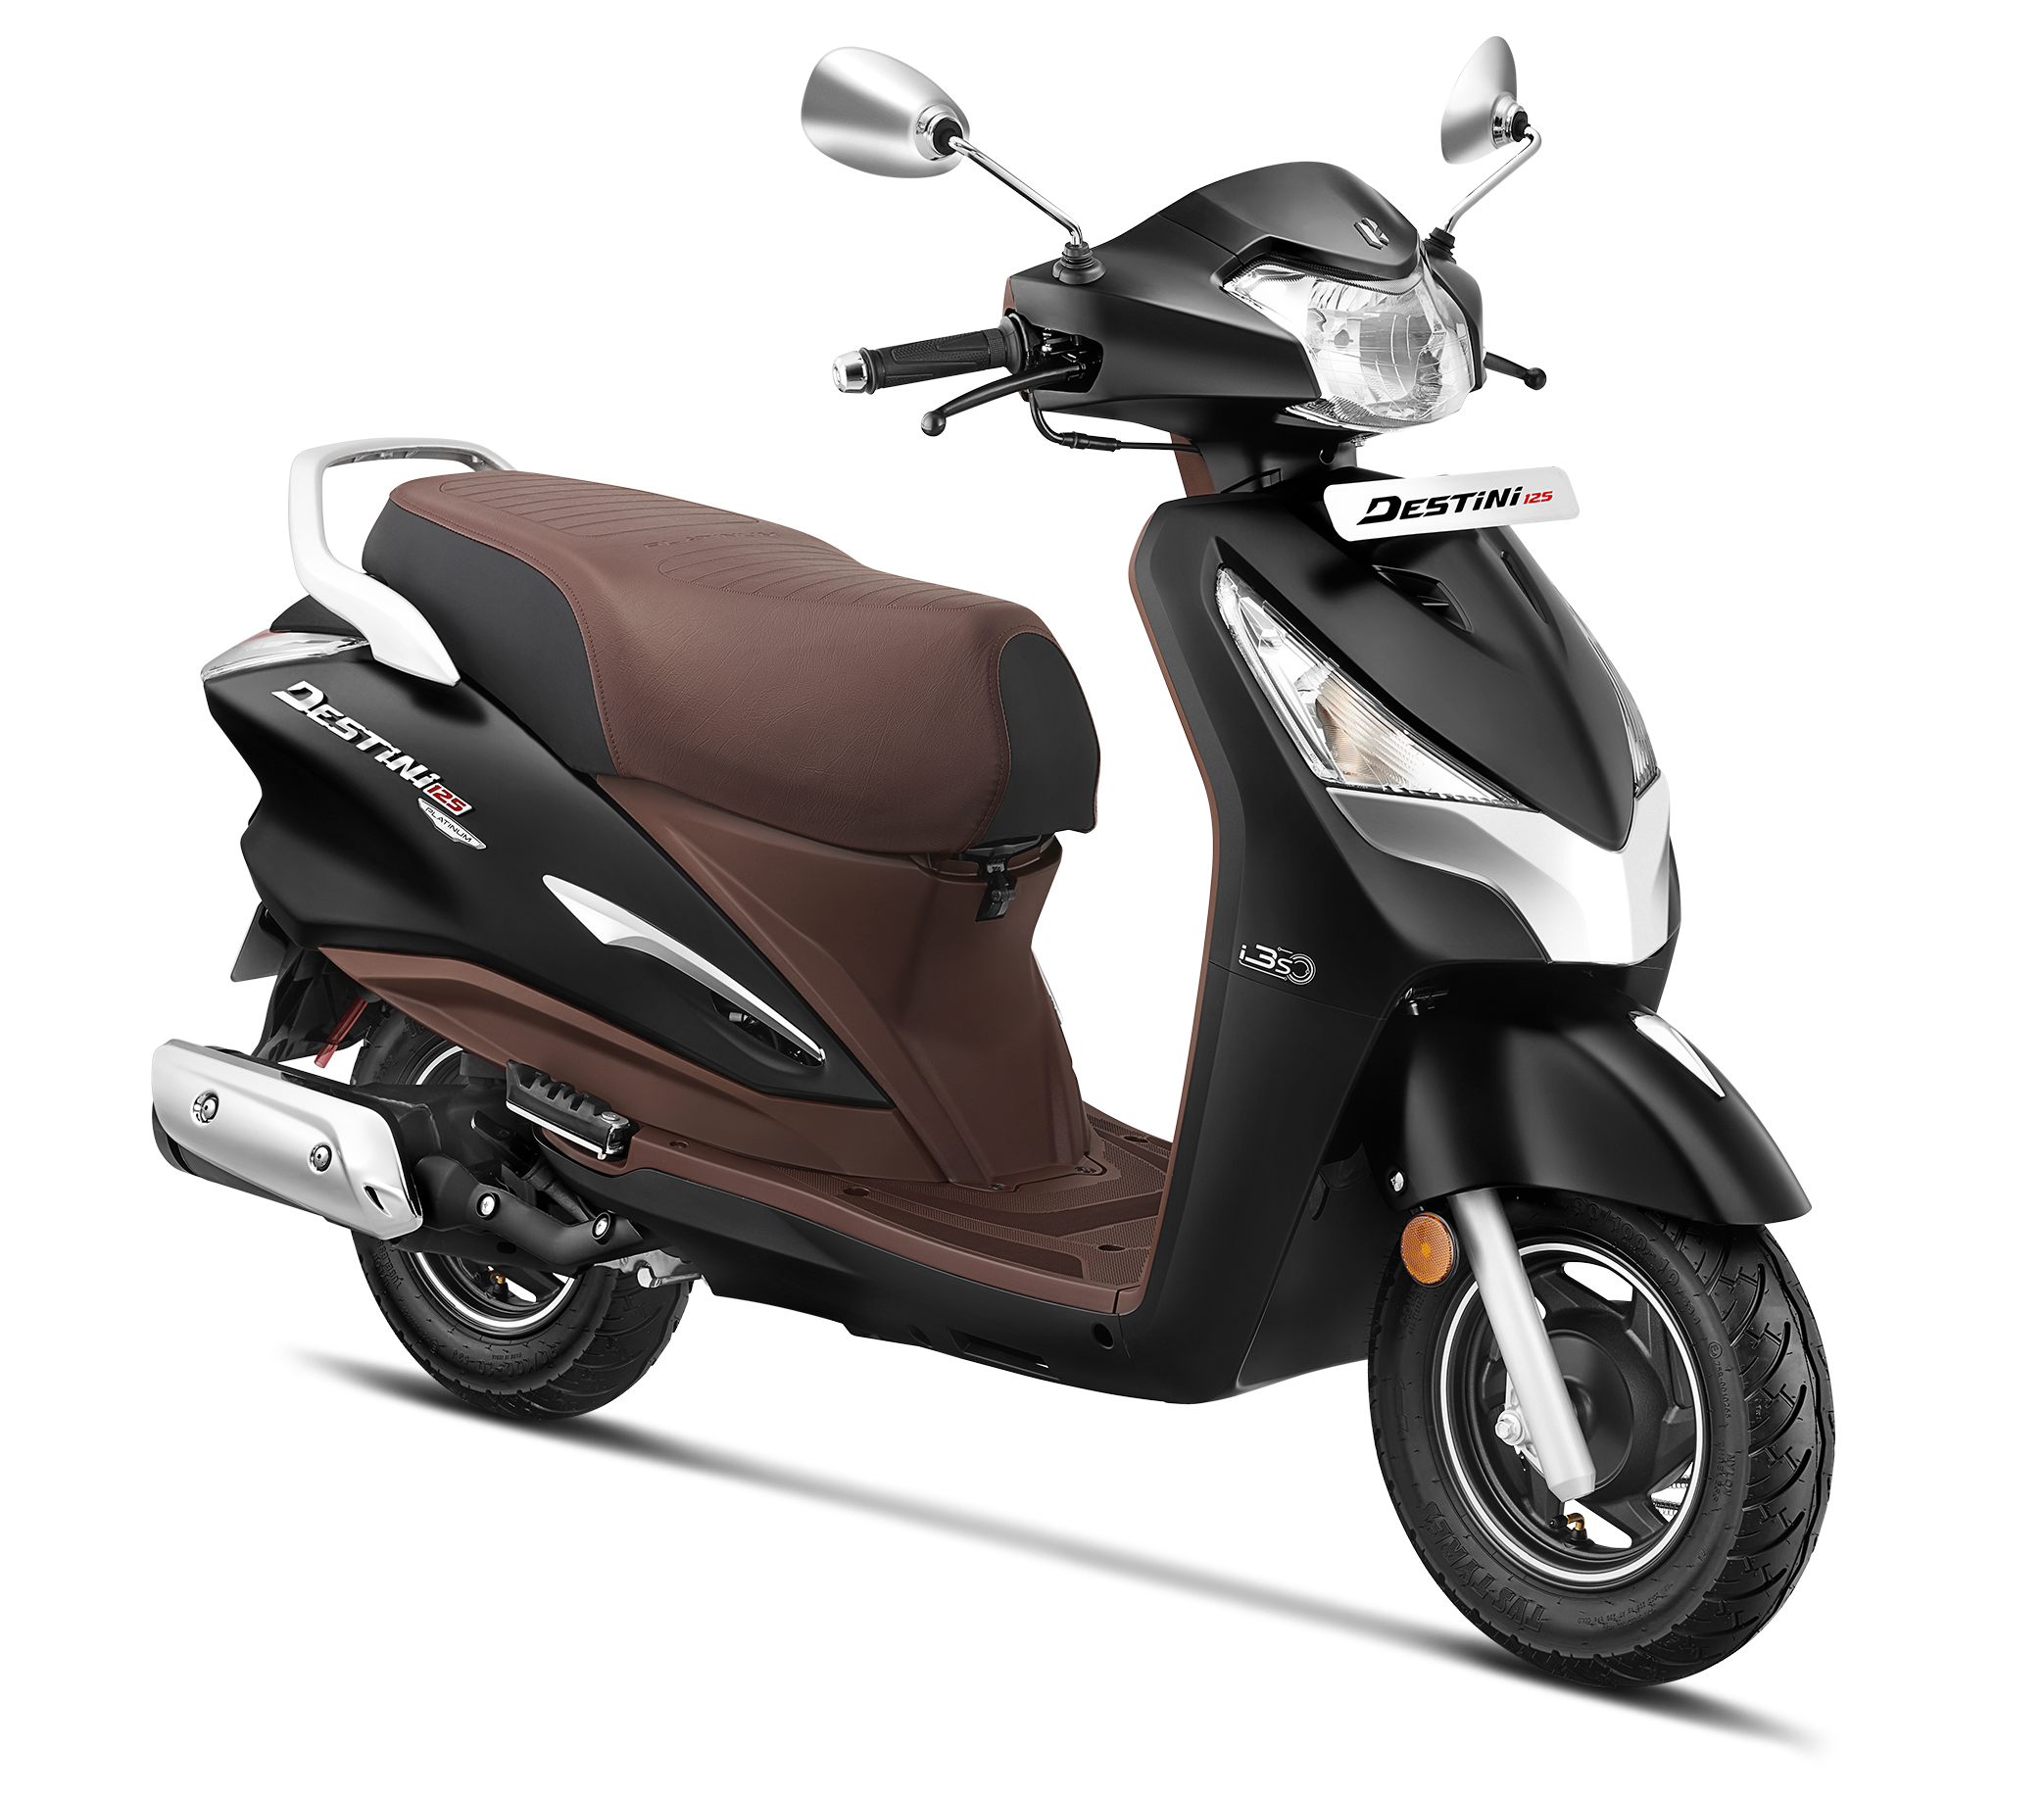 HERO MOTOCORP CONTINUES TO STRENGTHEN ITS SCOOTER PORTFOLIO   LAUNCHES THE DESTINI 125 ‘PLATINUM’